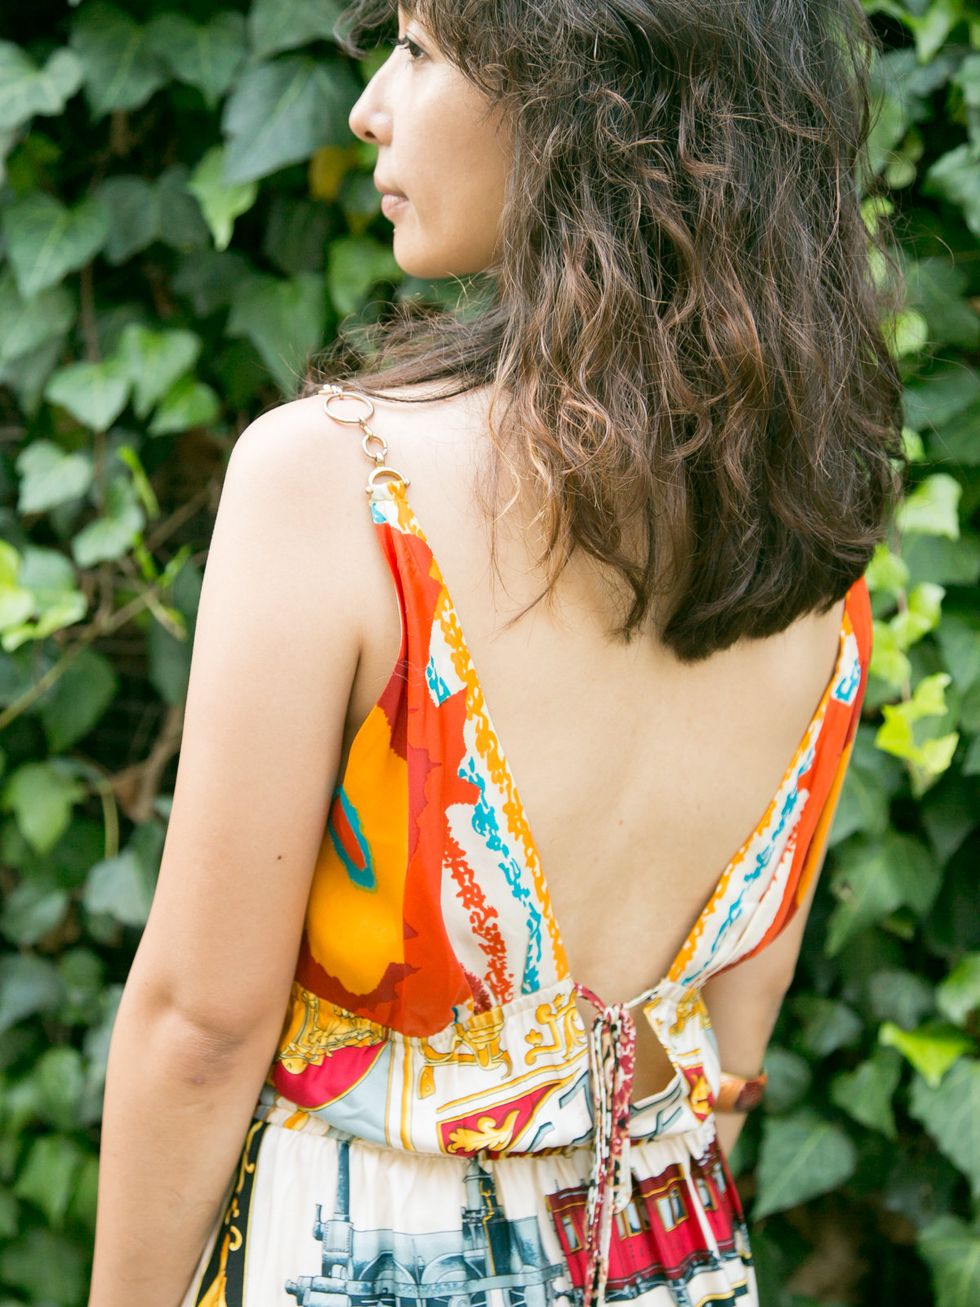 Clothing, Hairstyle, Shoulder, Summer, Style, Beauty, People in nature, Fashion, Neck, Orange, 